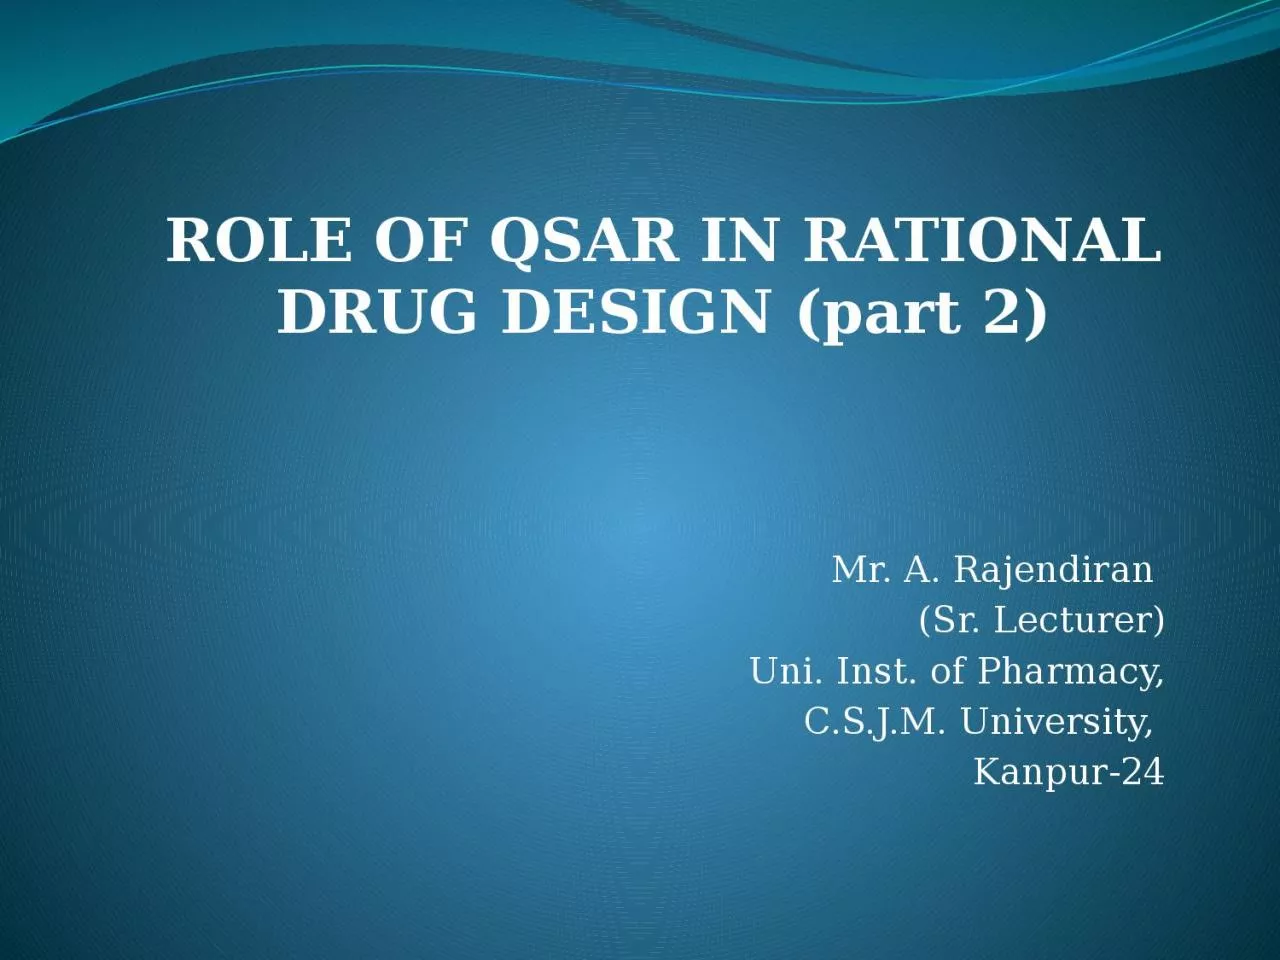 ROLE OF QSAR IN RATIONAL DRUG